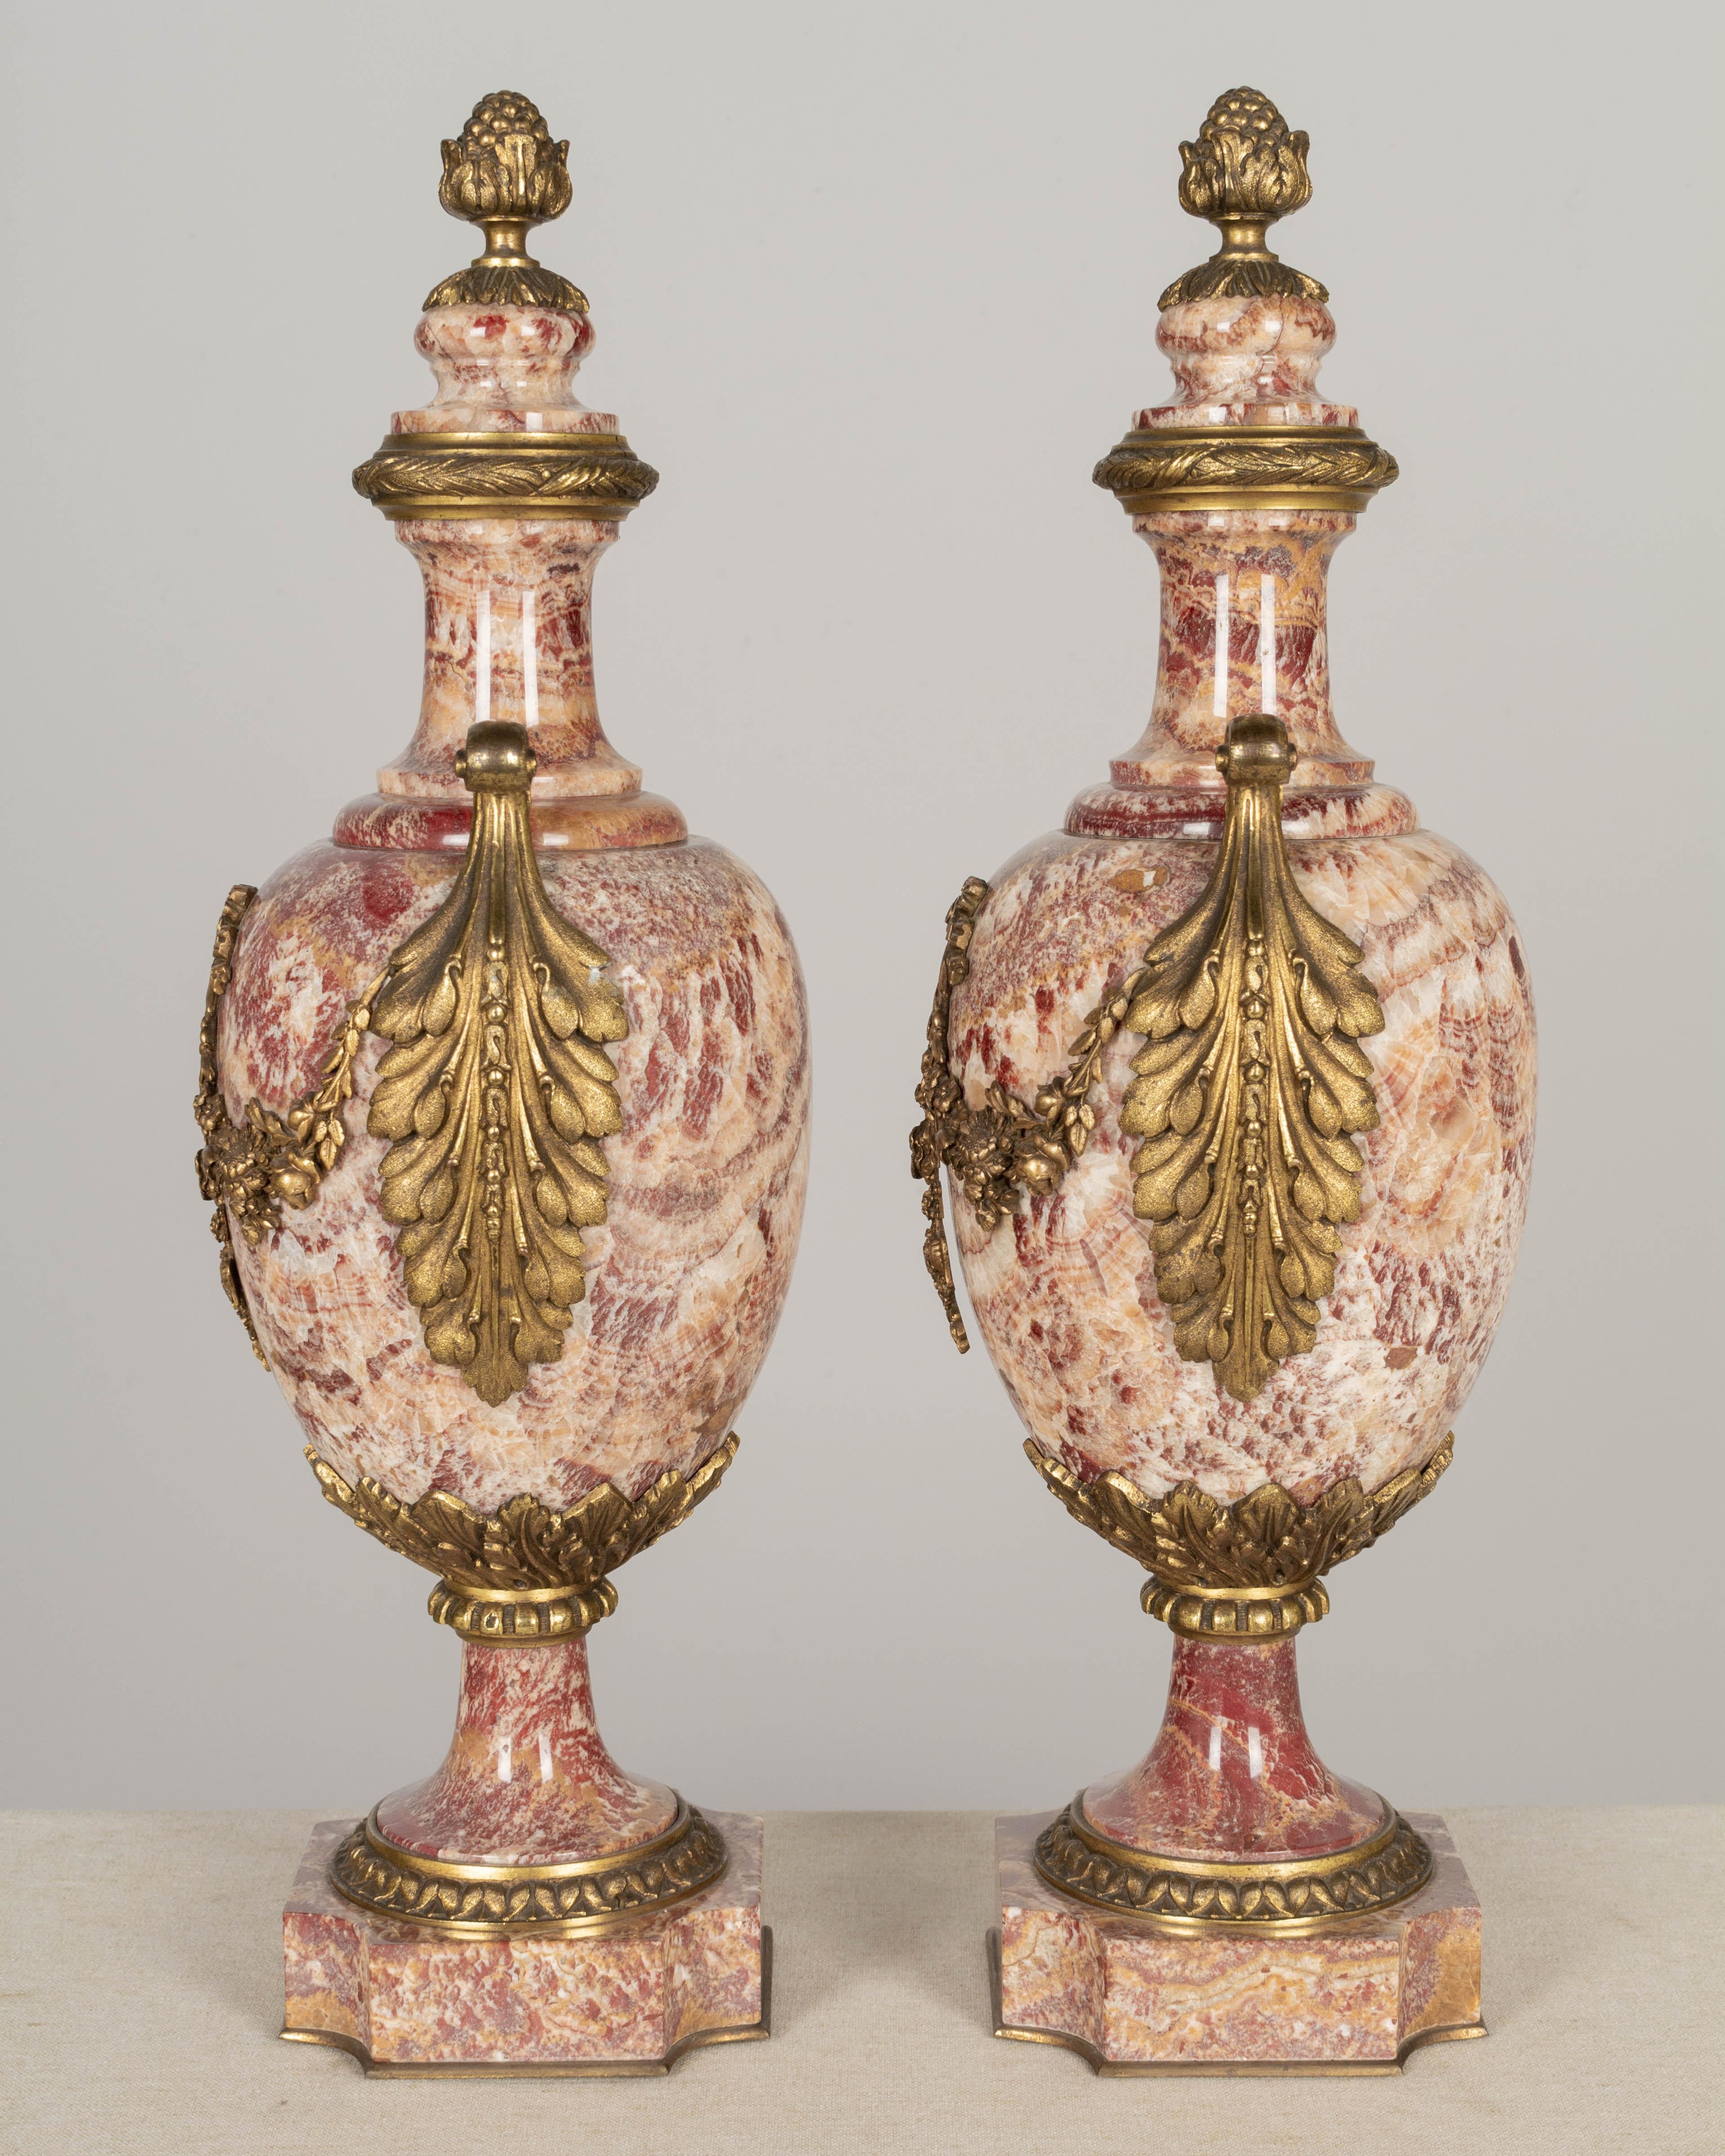 19th Century French Marble and Bronze Cassolette Urns Pair For Sale 1